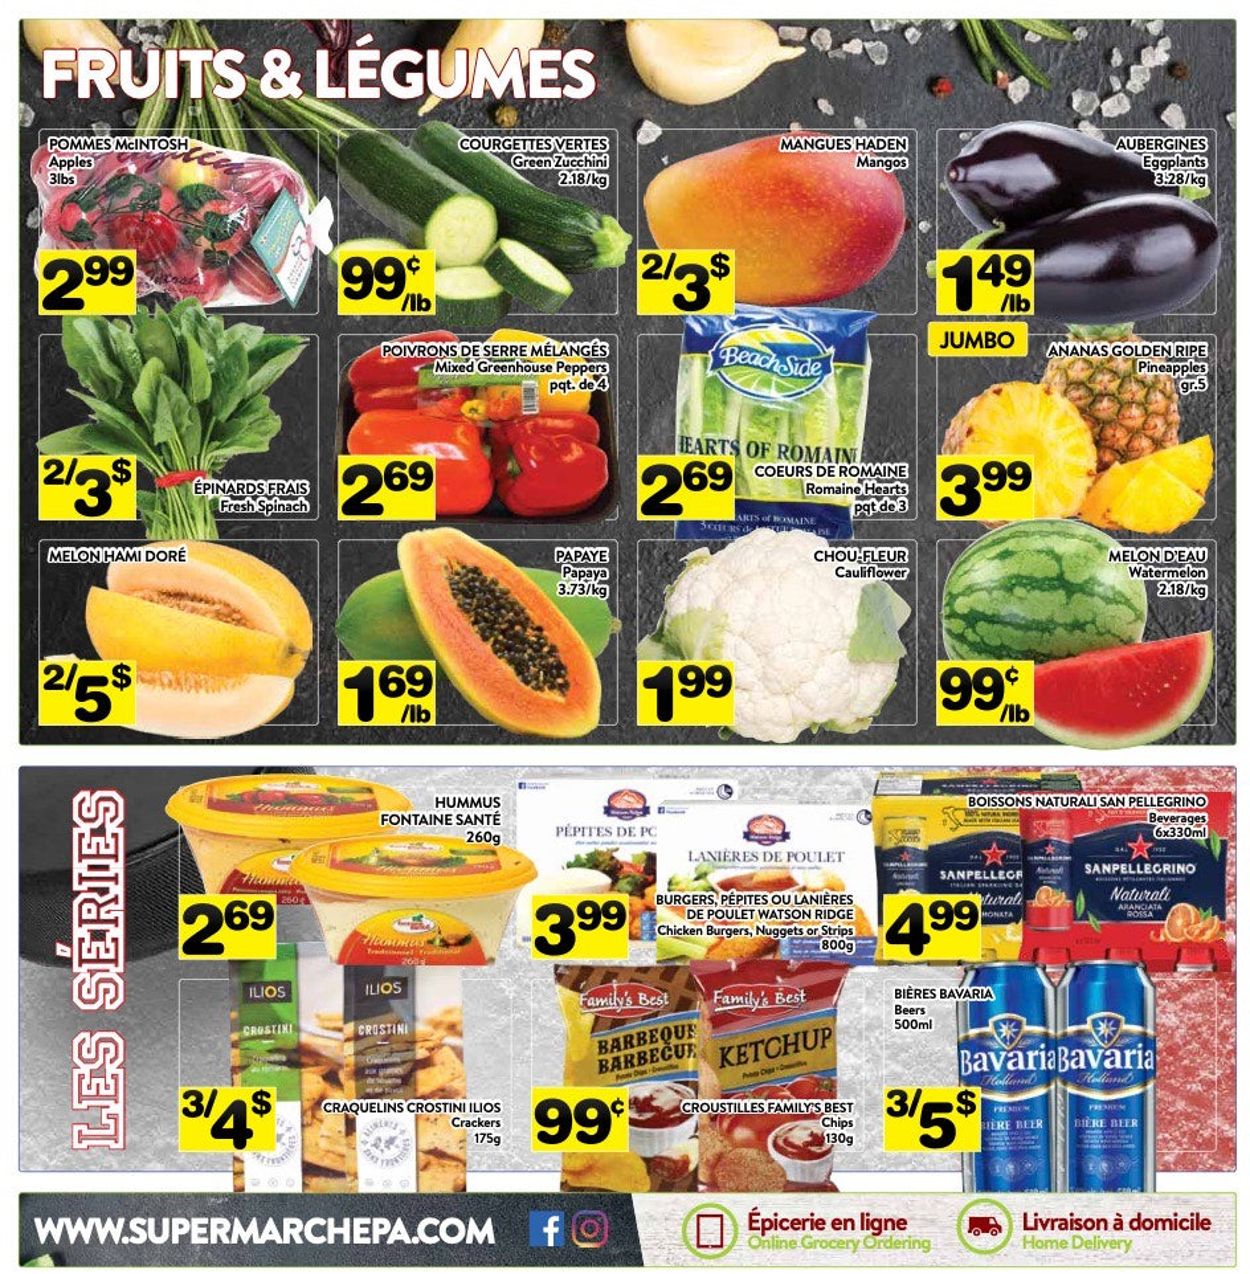 PA Supermarché Flyer from 05/02/2022